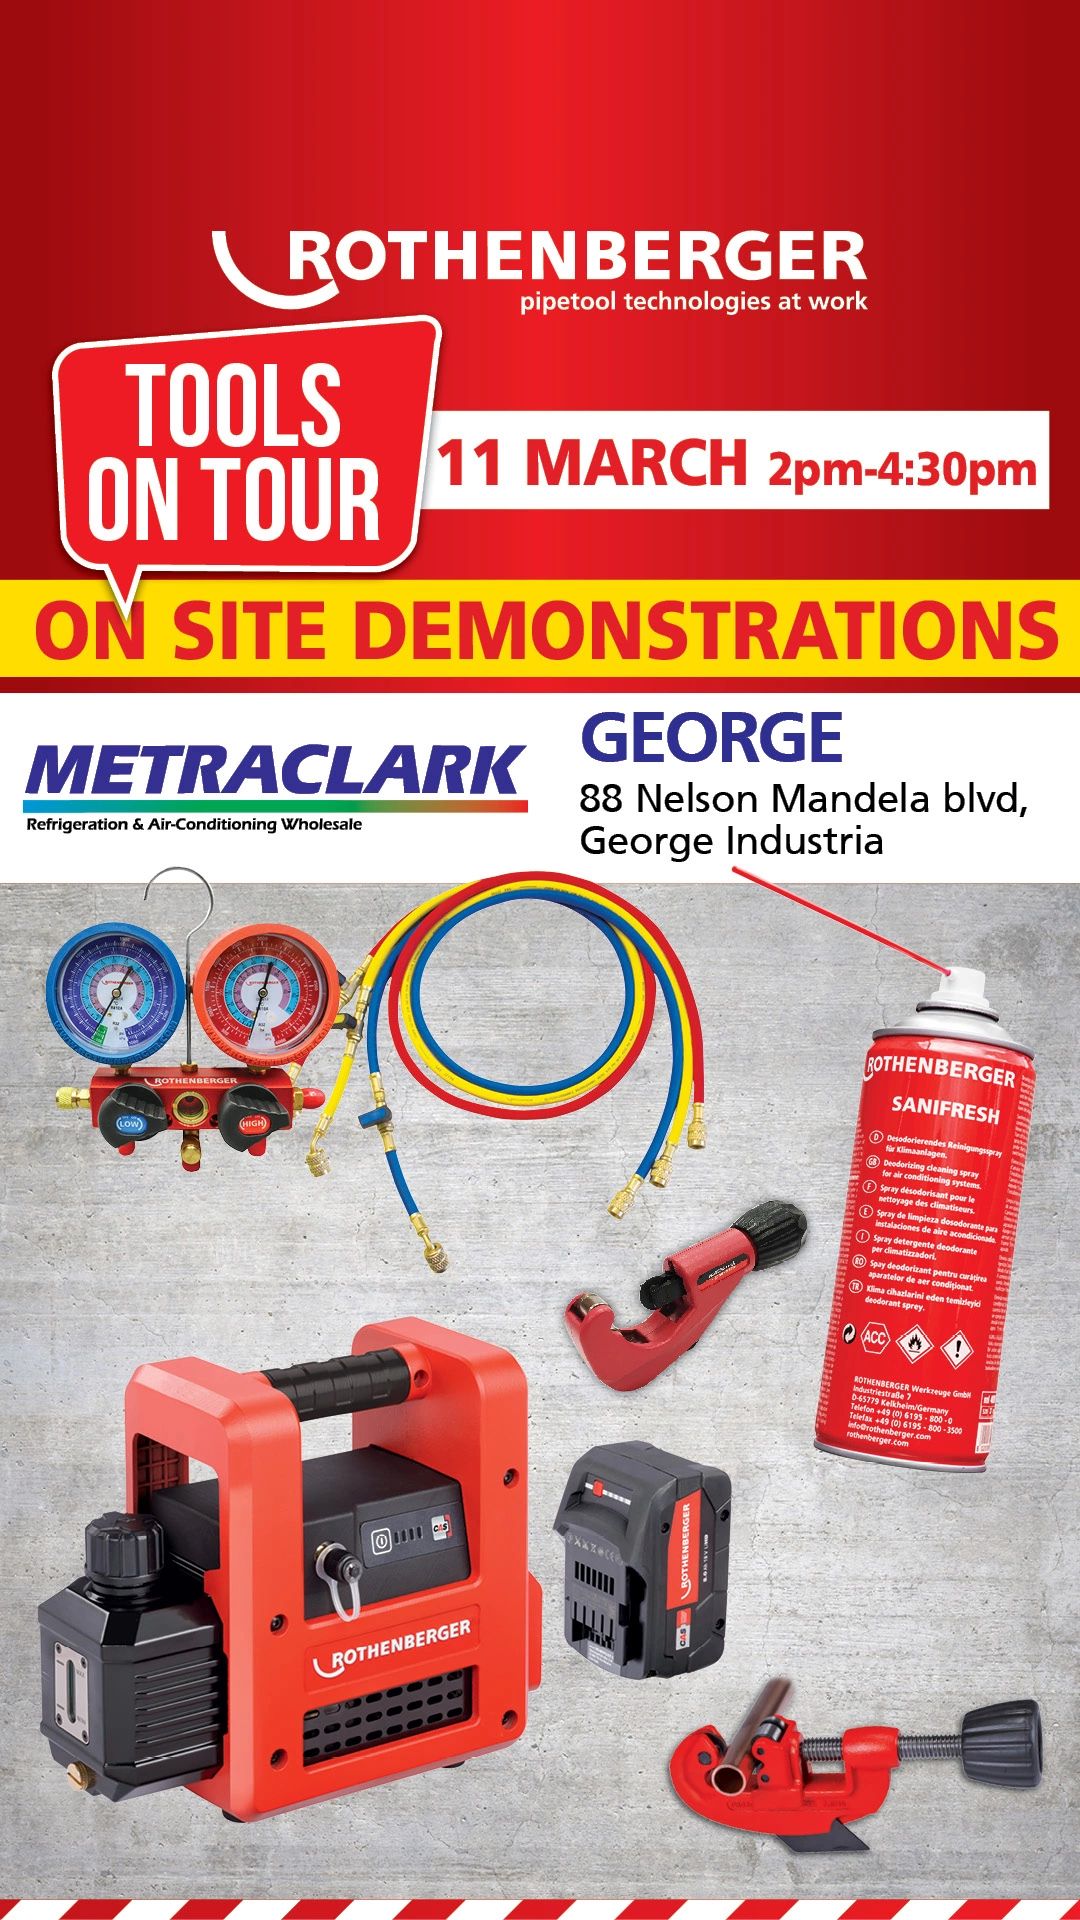 Rothenberger On Site Demonstrations -11 March Metraclark George Branch